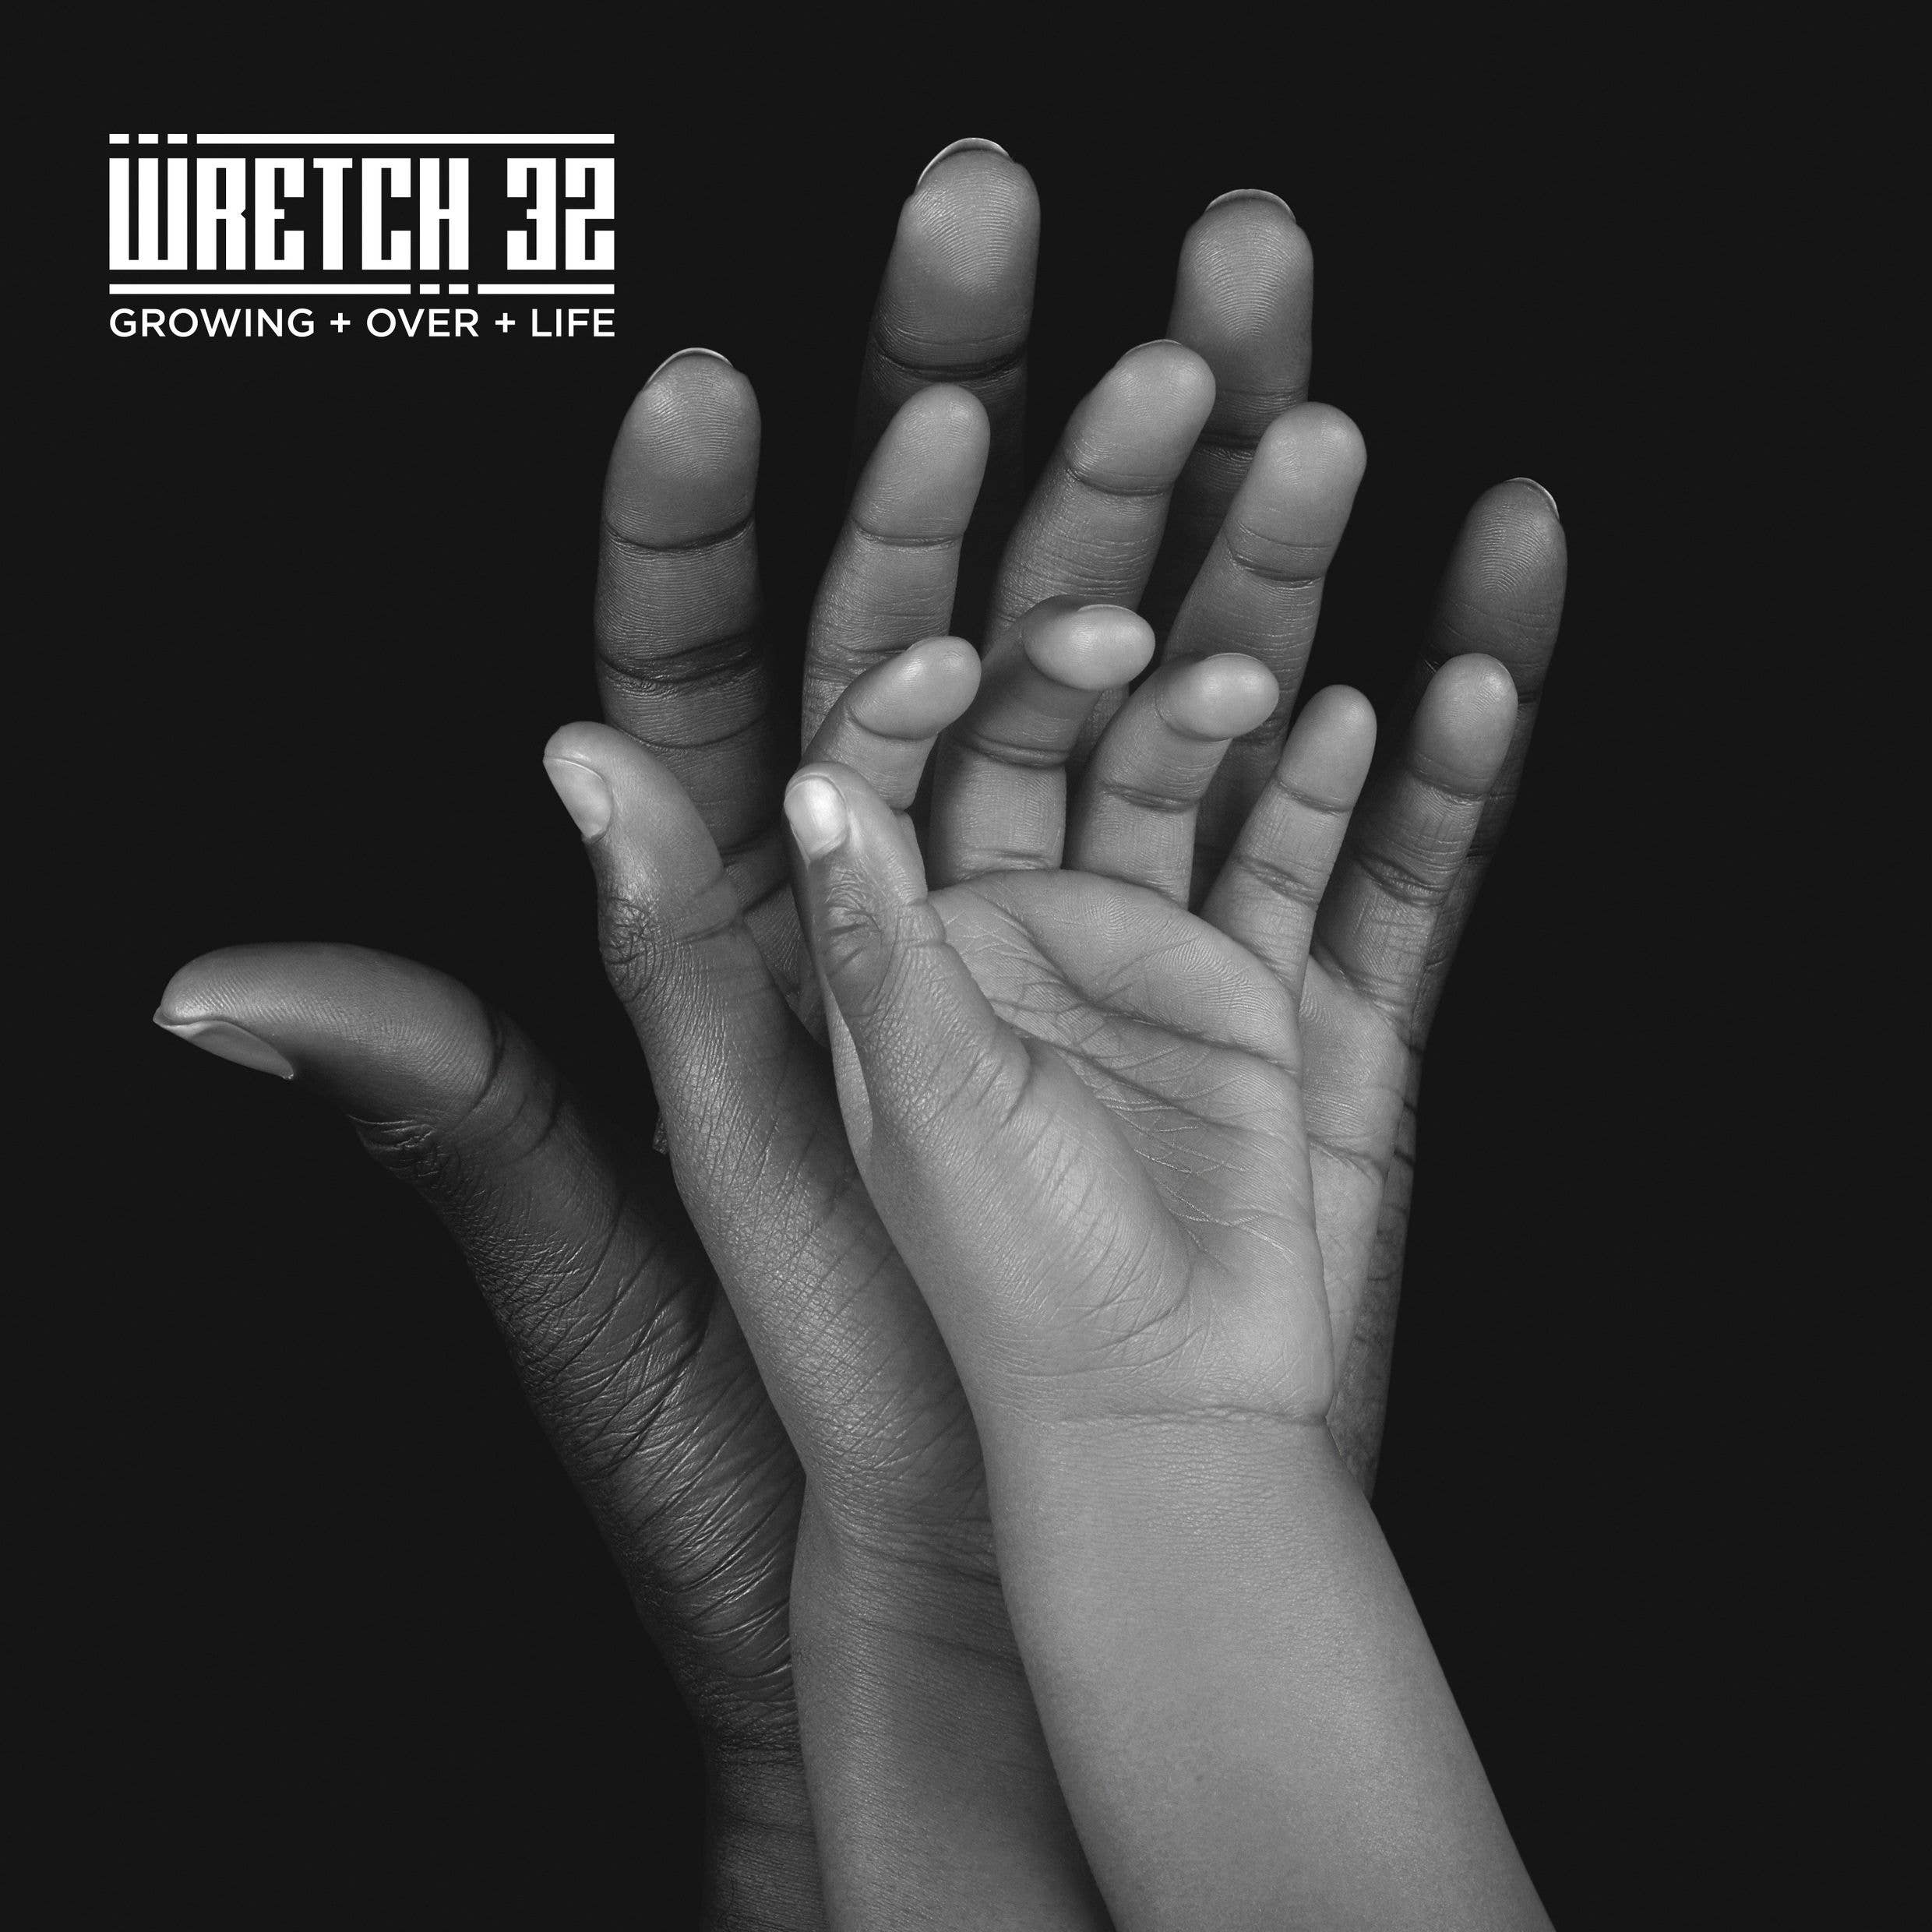 wretch 32 growing over life